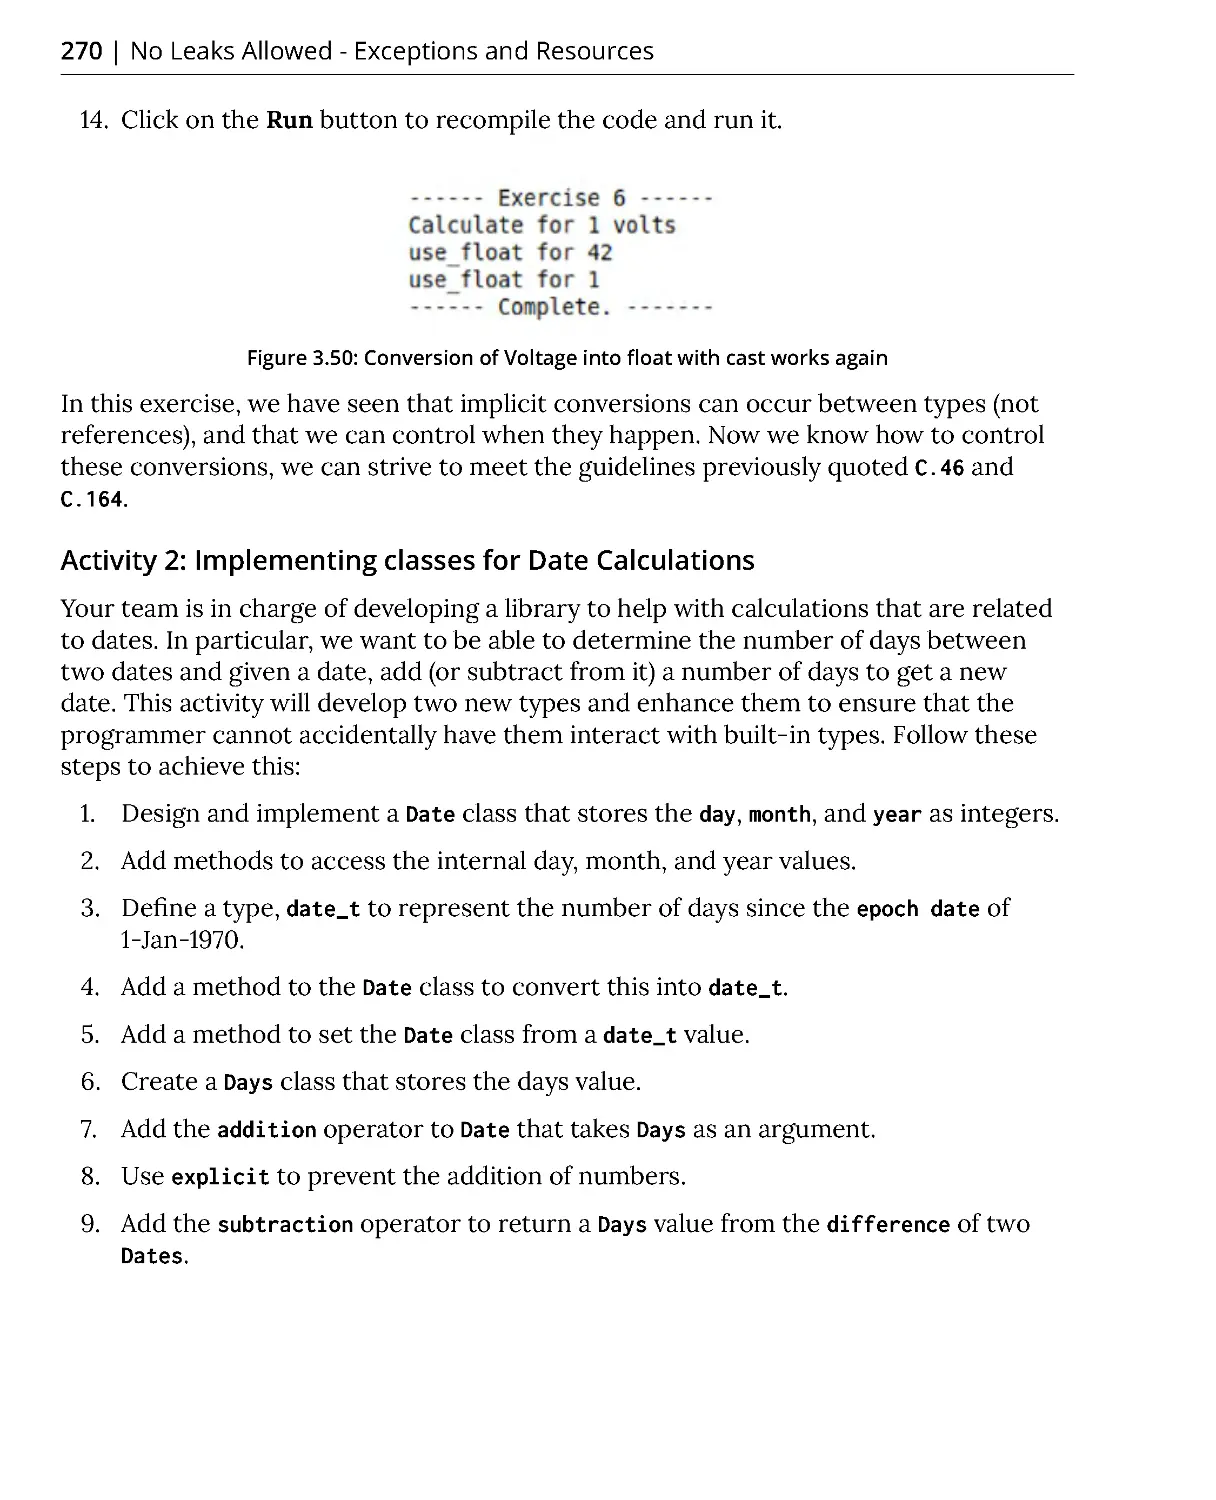 Activity 2: Implementing classes for Date Calculations